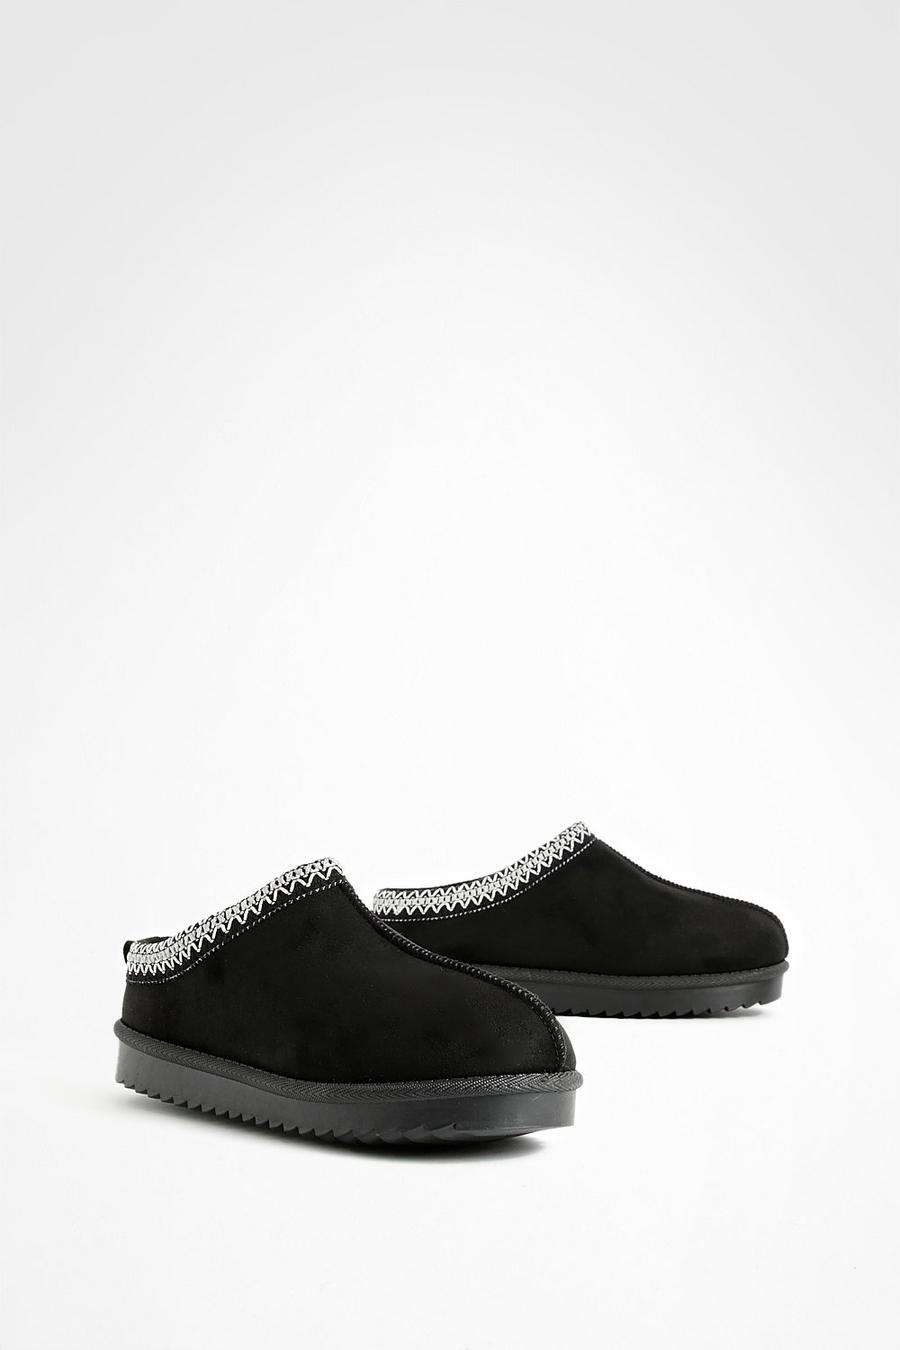 Black Embroidered Slip On Cozy Mules